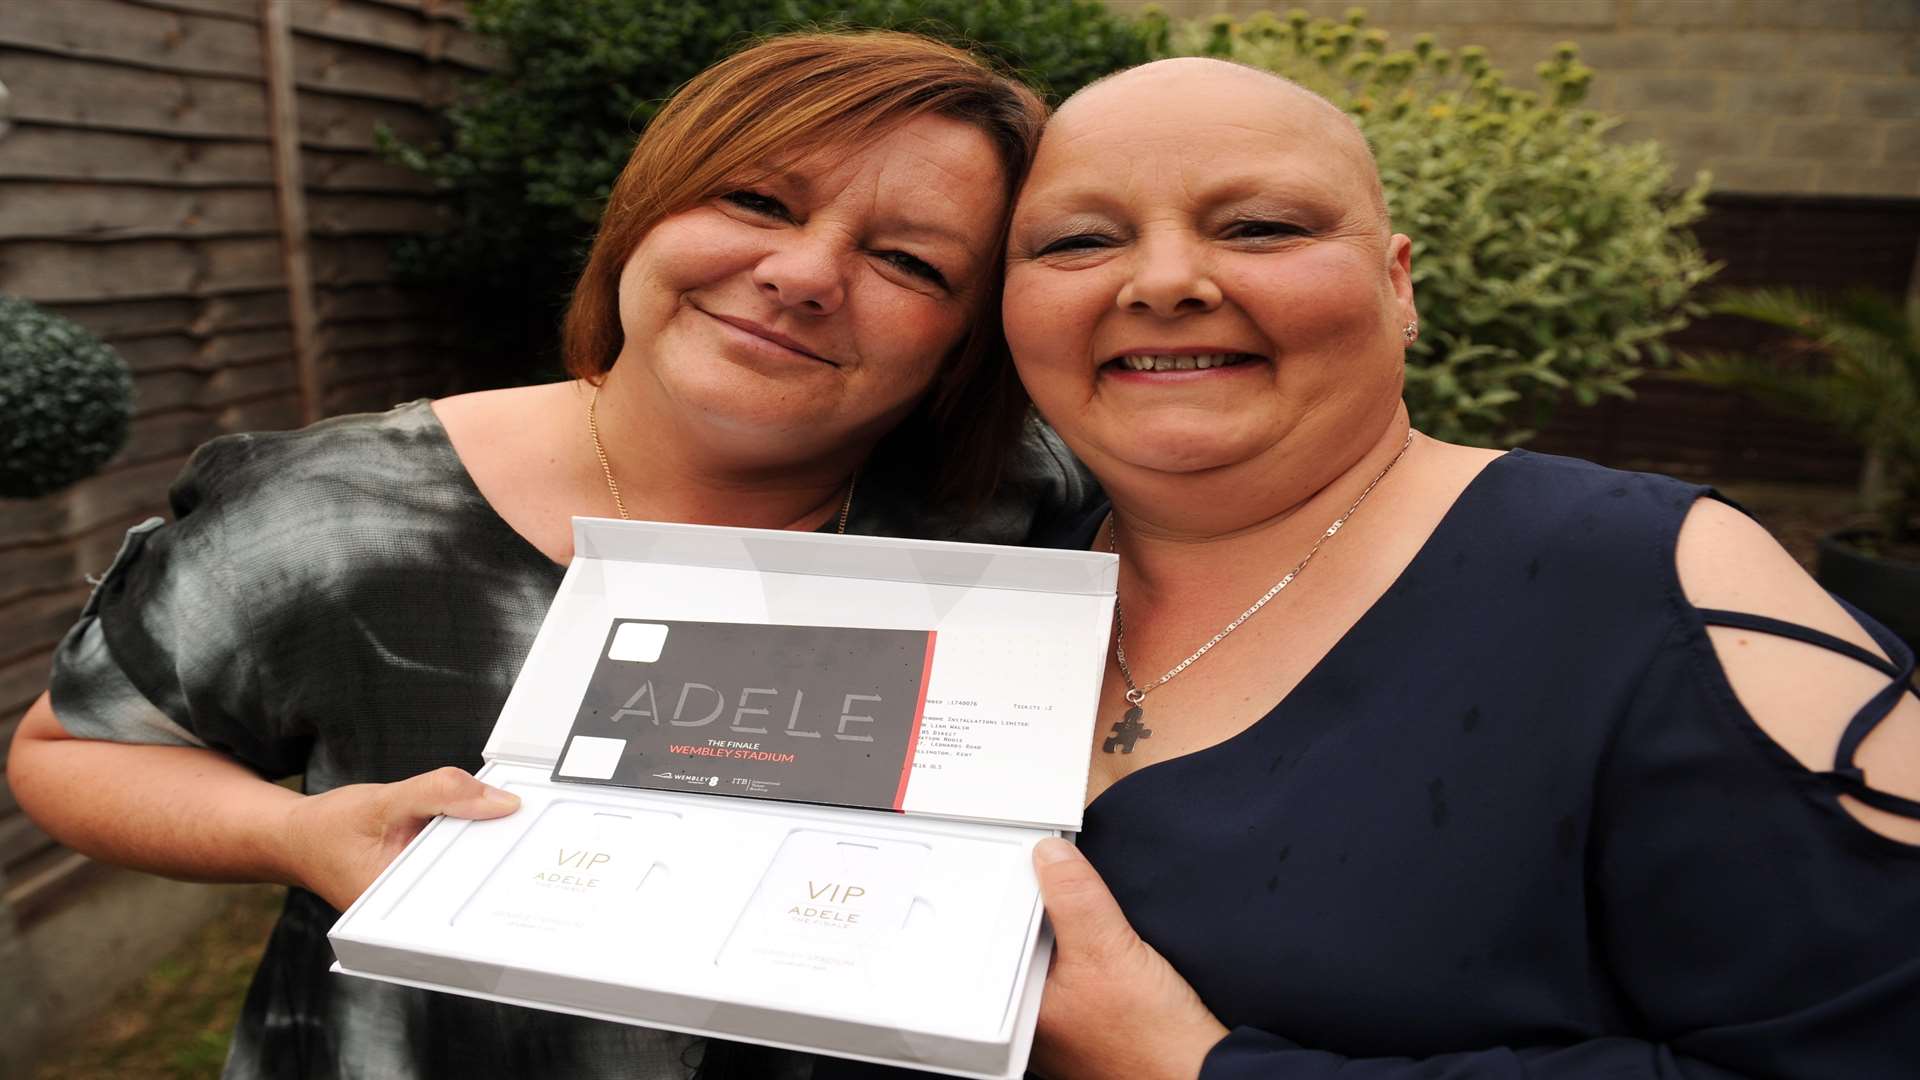 Justine and Lisa with their VIP Adele tickets